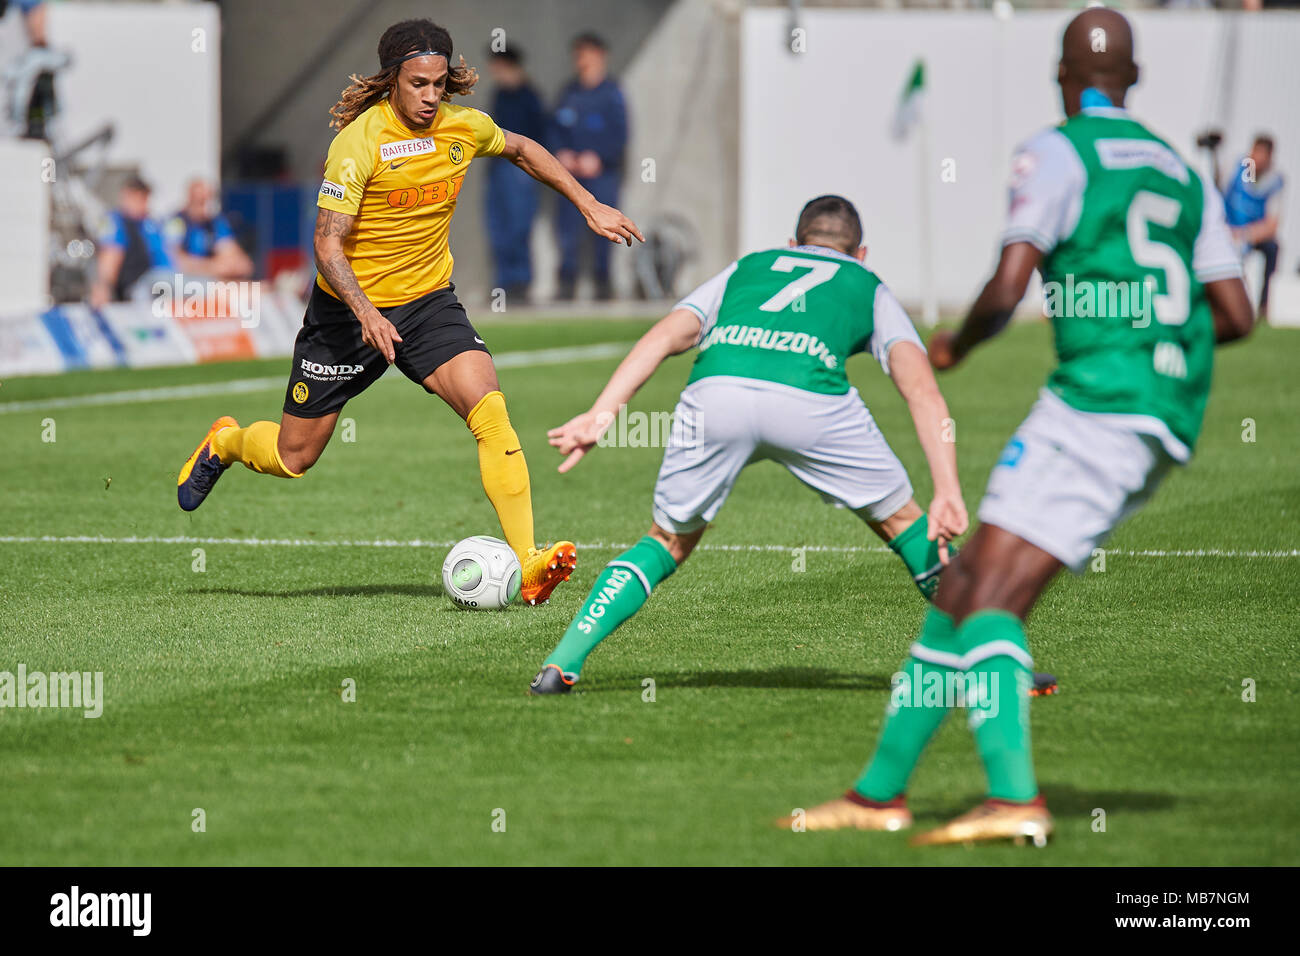 St. Gallen, Switzerland. 8th April 2018. Kevin Mbabu during the Raiffeisen Super League Match FC St. Gallen 1879 vs. BSC Young Boys. Credit: Rolf Simeon/Alamy Live News Stock Photo